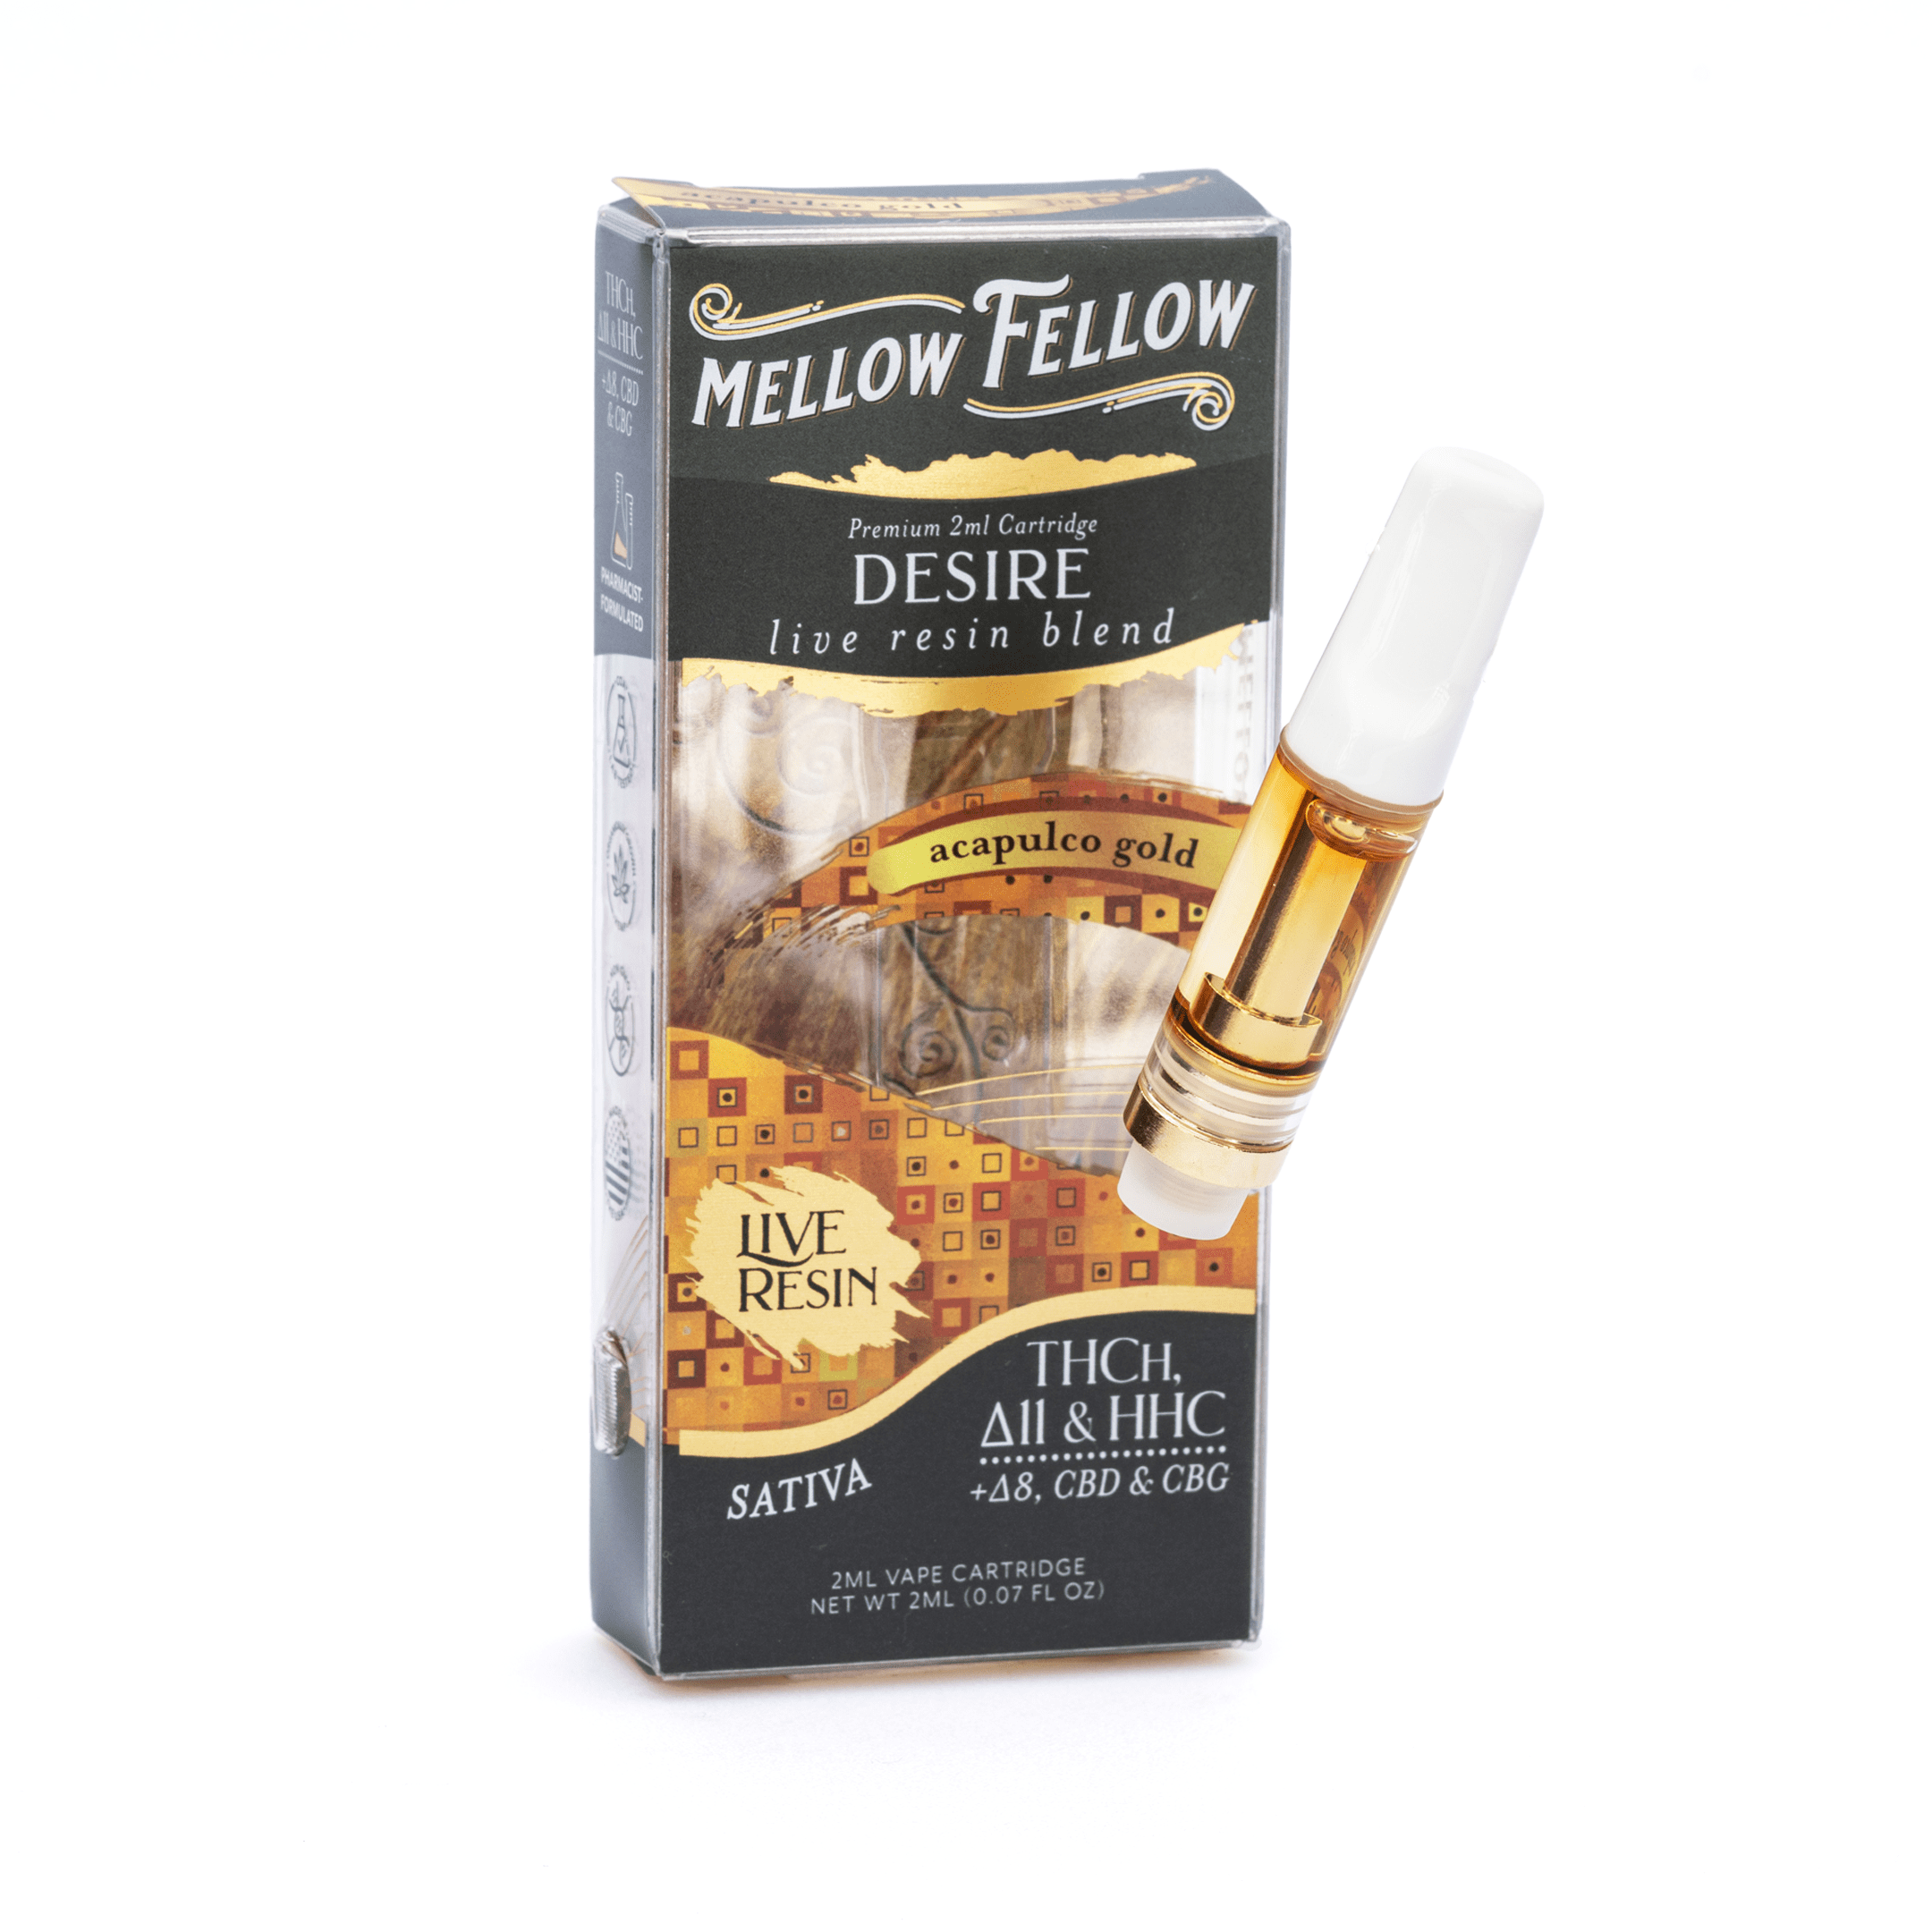 Experience Luxury: Explore High Potency Live Resin Carts